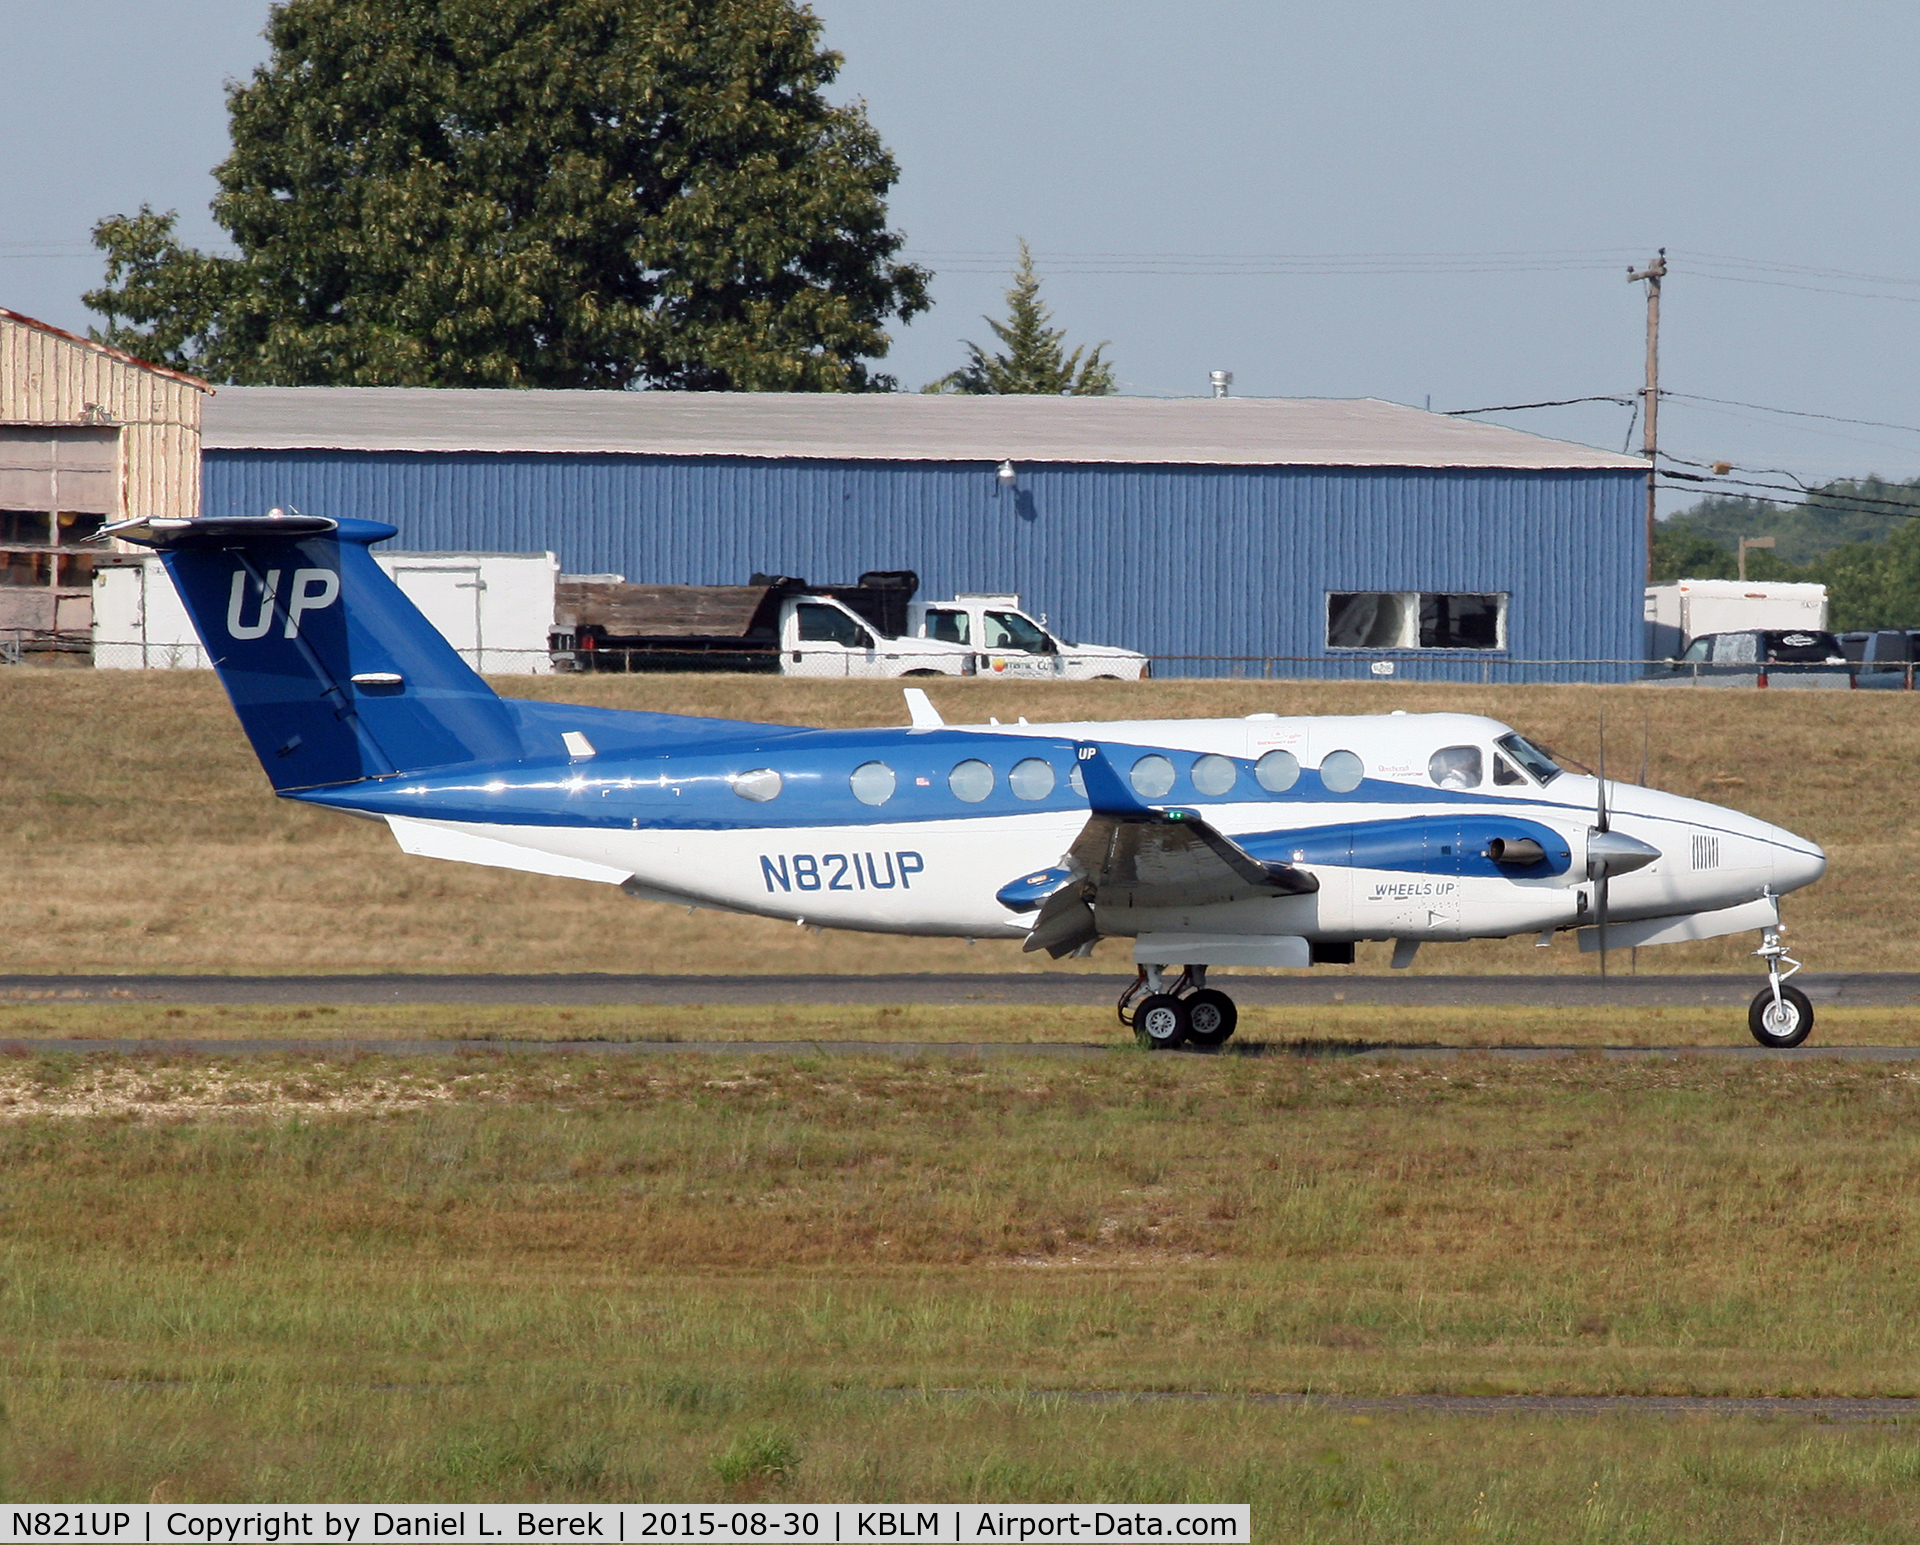 N821UP, 2014 Beechcraft B300 King Air 350i C/N FL-908, I was very pleased to capture this very nice - and interesting - Beech King Air of Wheels Up LLC.